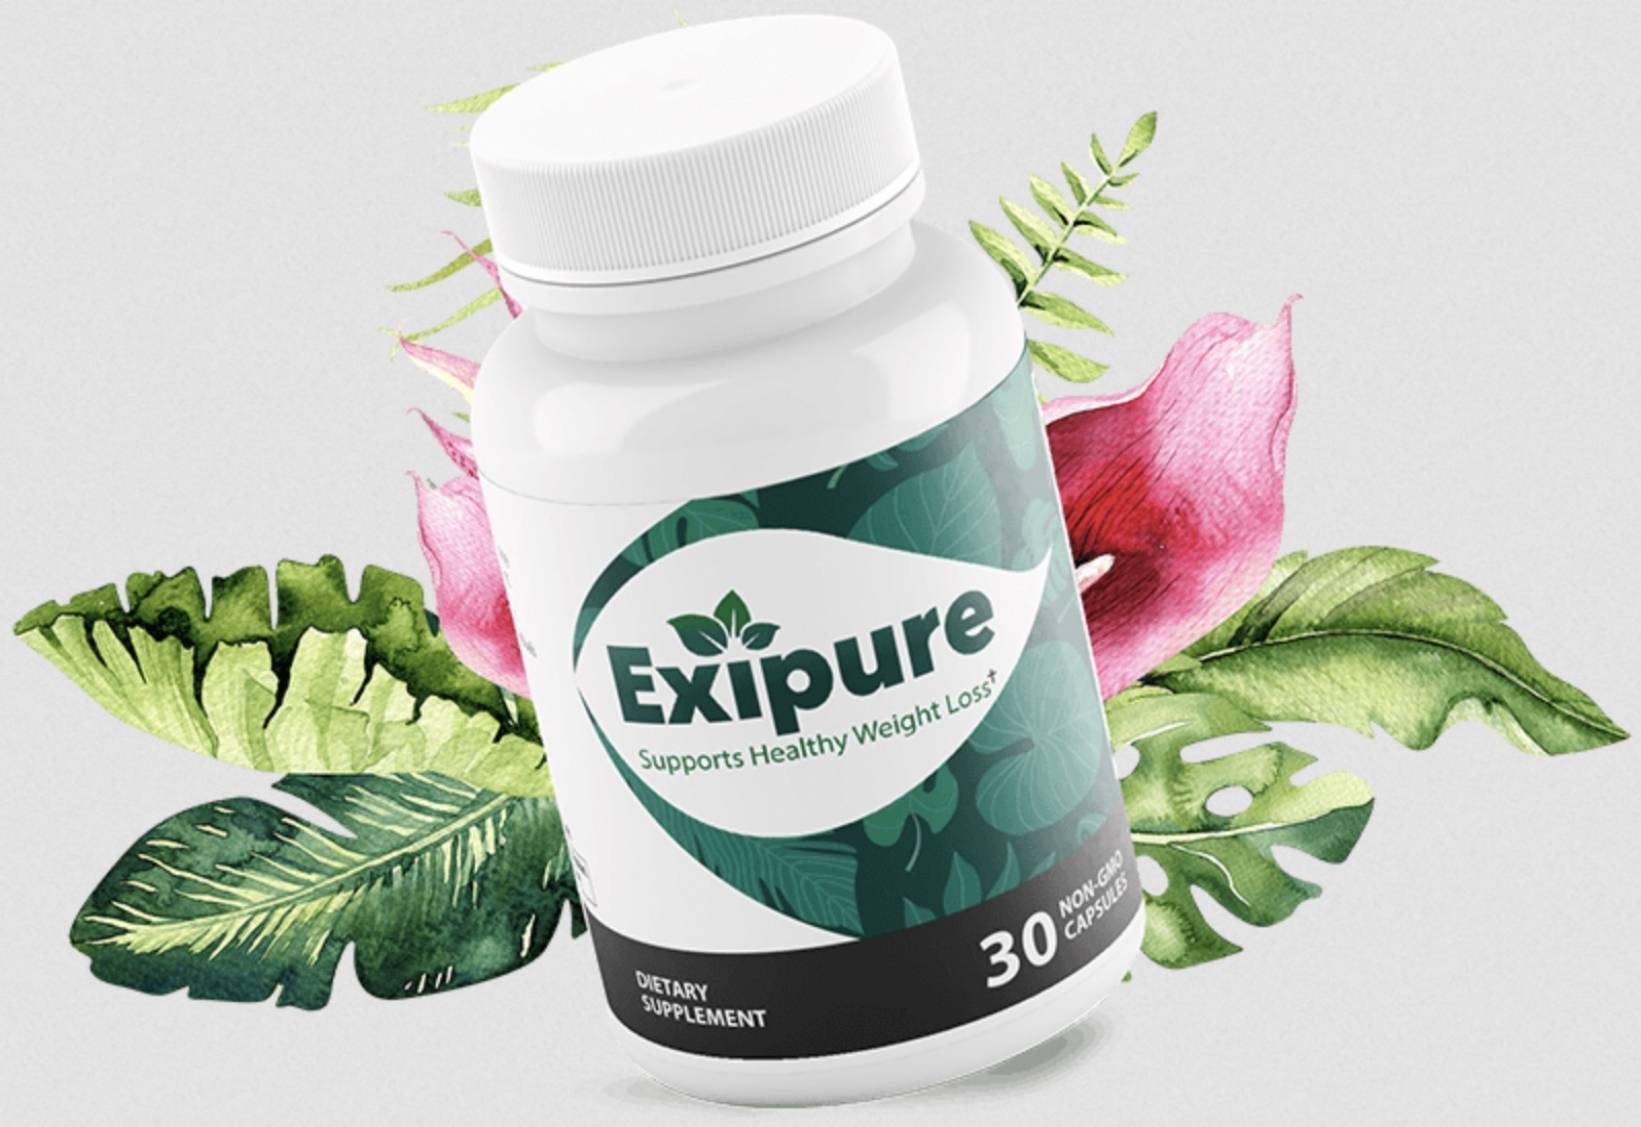 Cheapest Price For Exipure